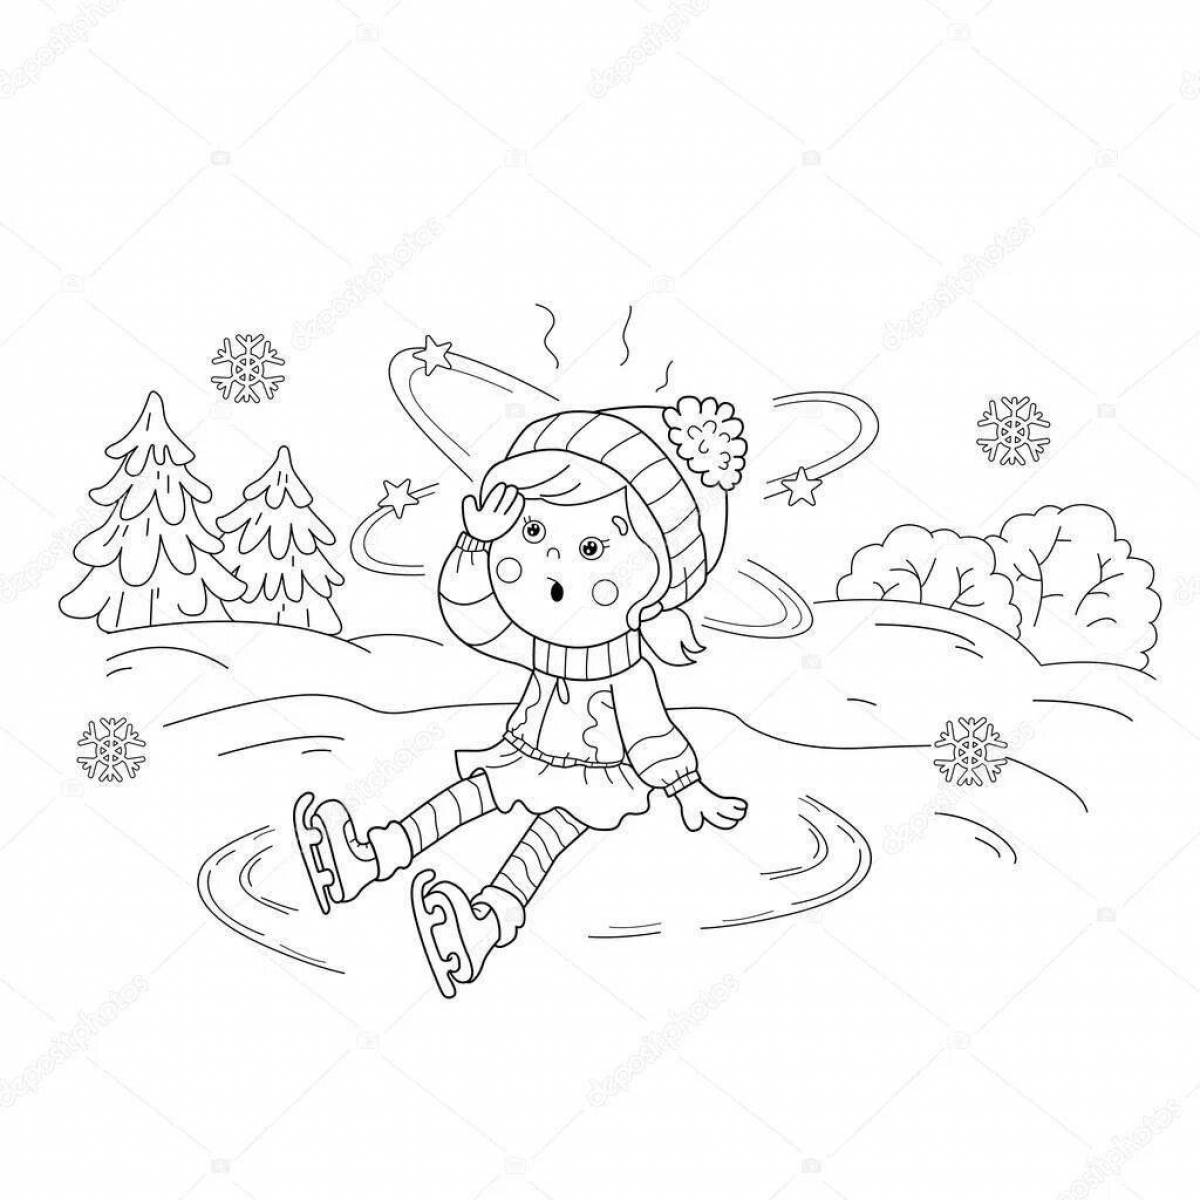 Charming ice memo coloring page